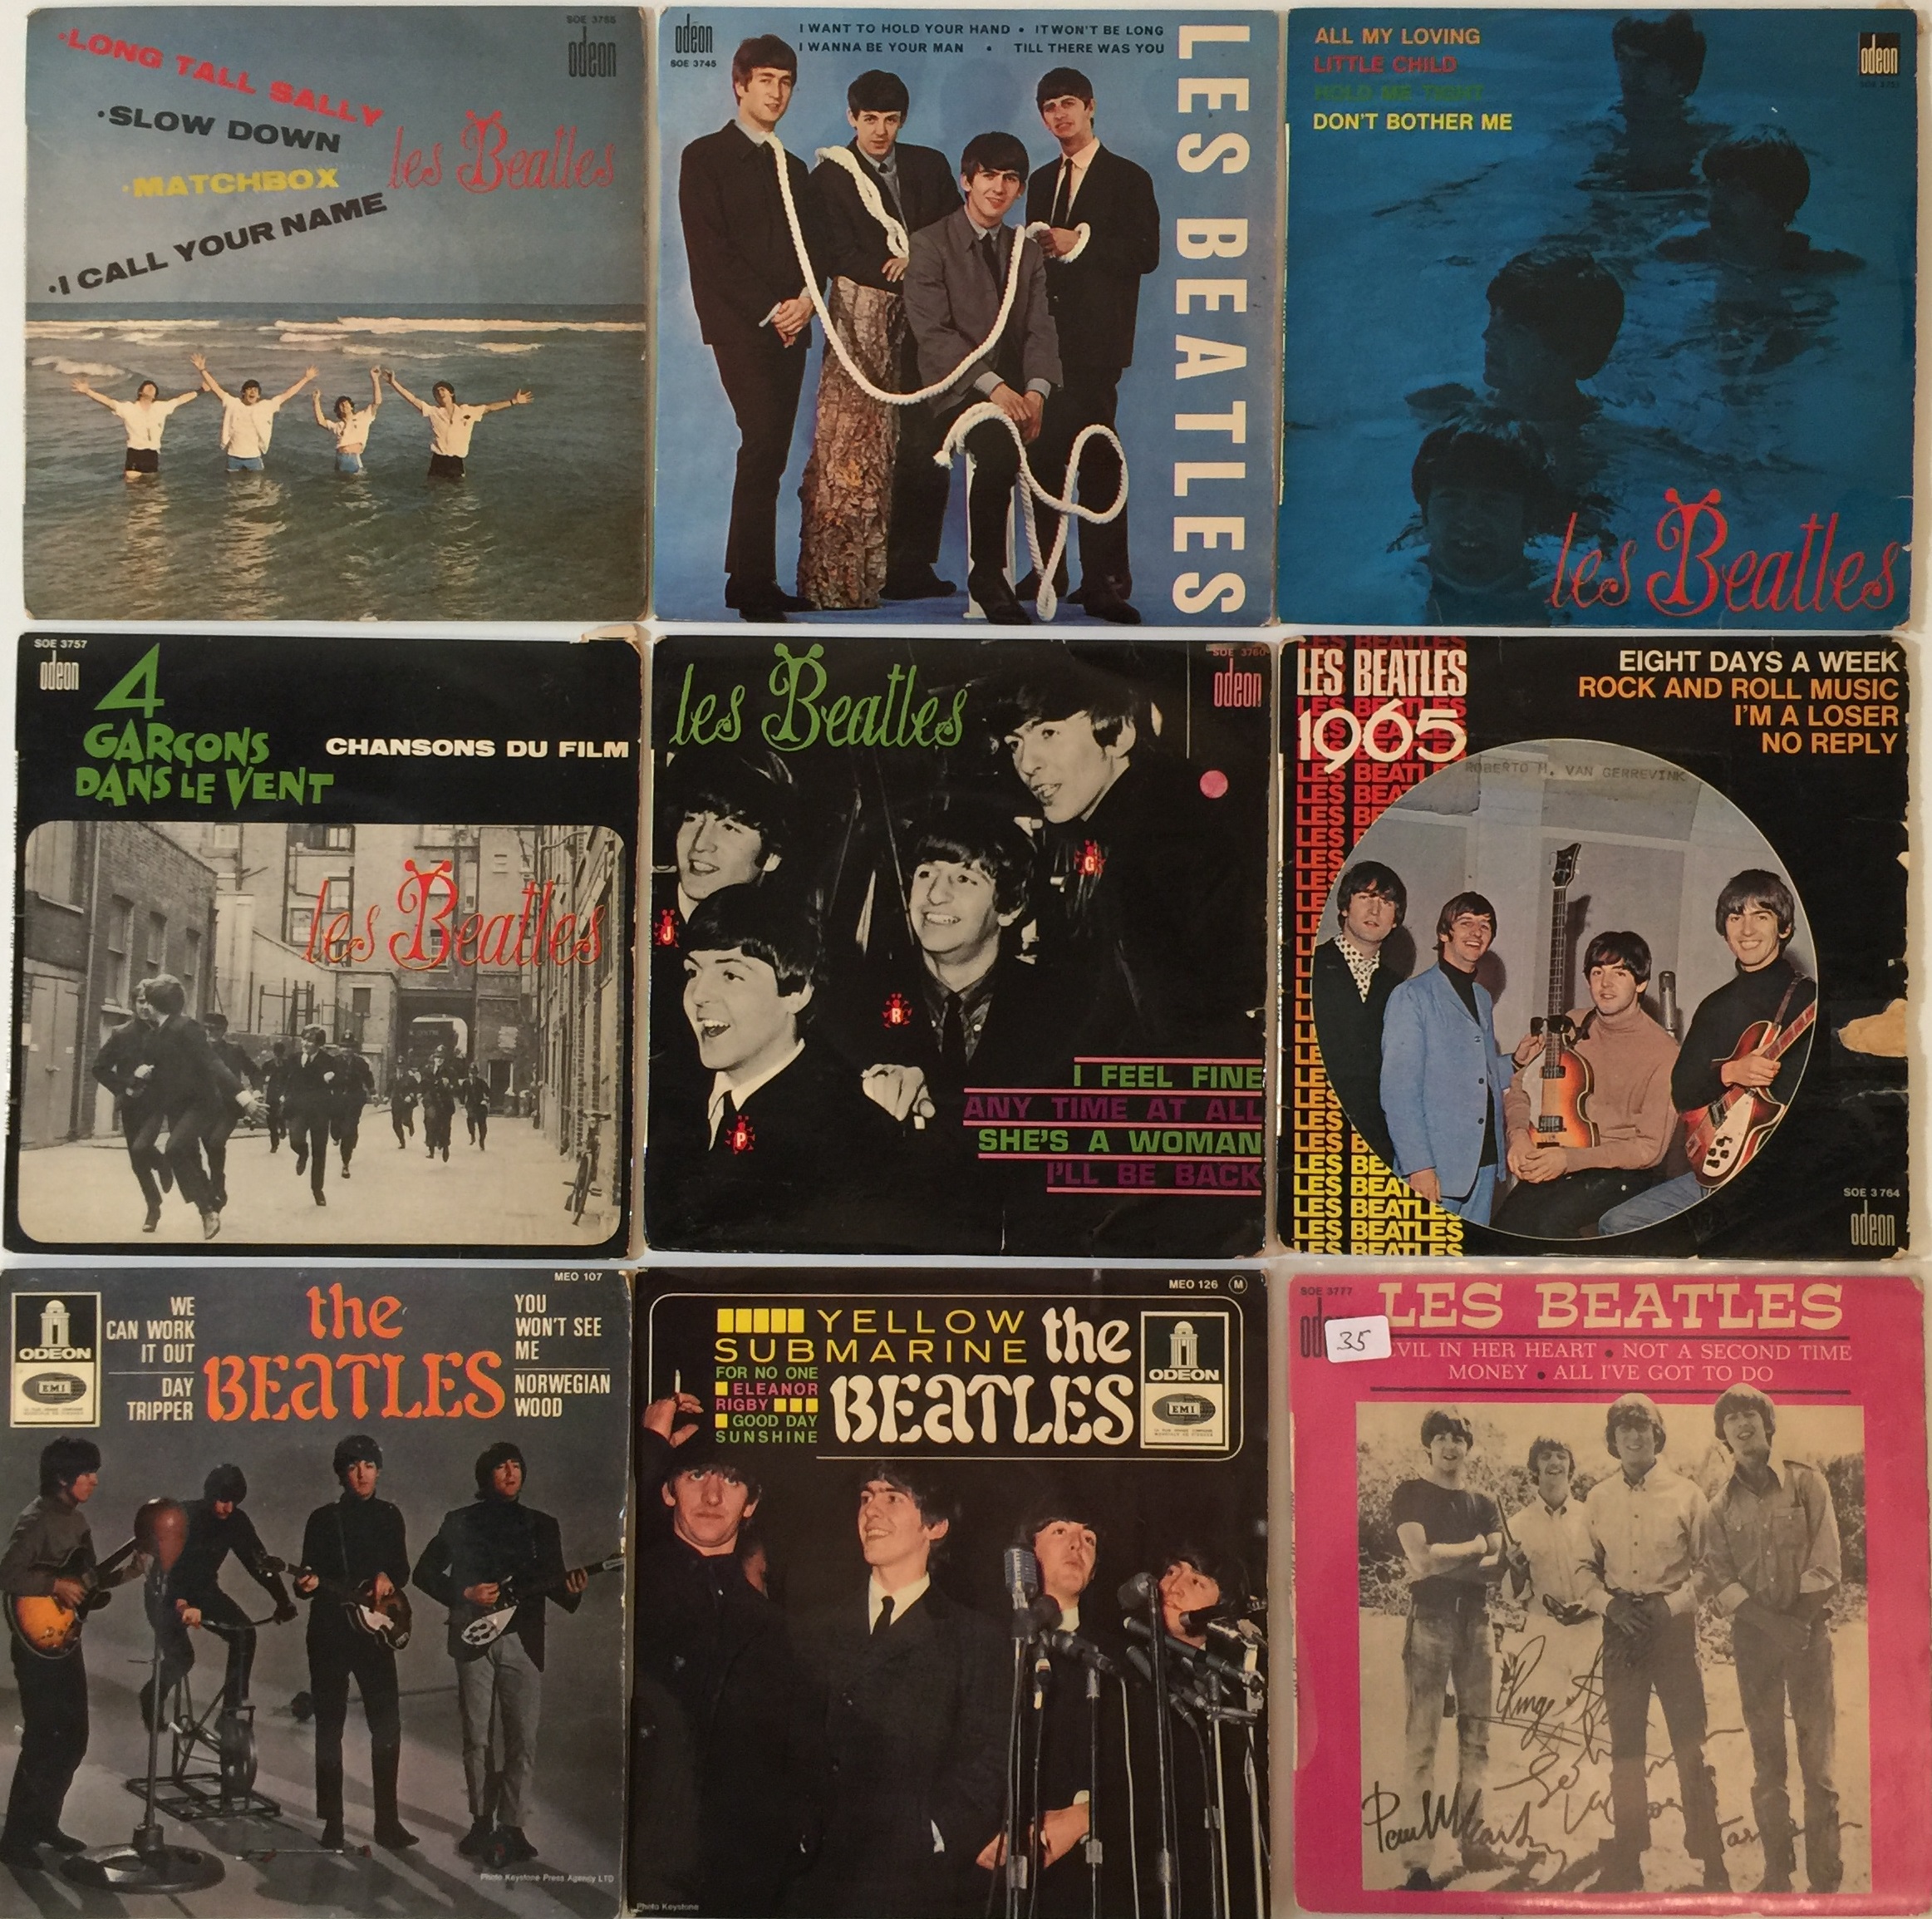 THE BEATLES - FRENCH 7" COLLECTION. A smashing collection of around 25 French pressed 7" records.